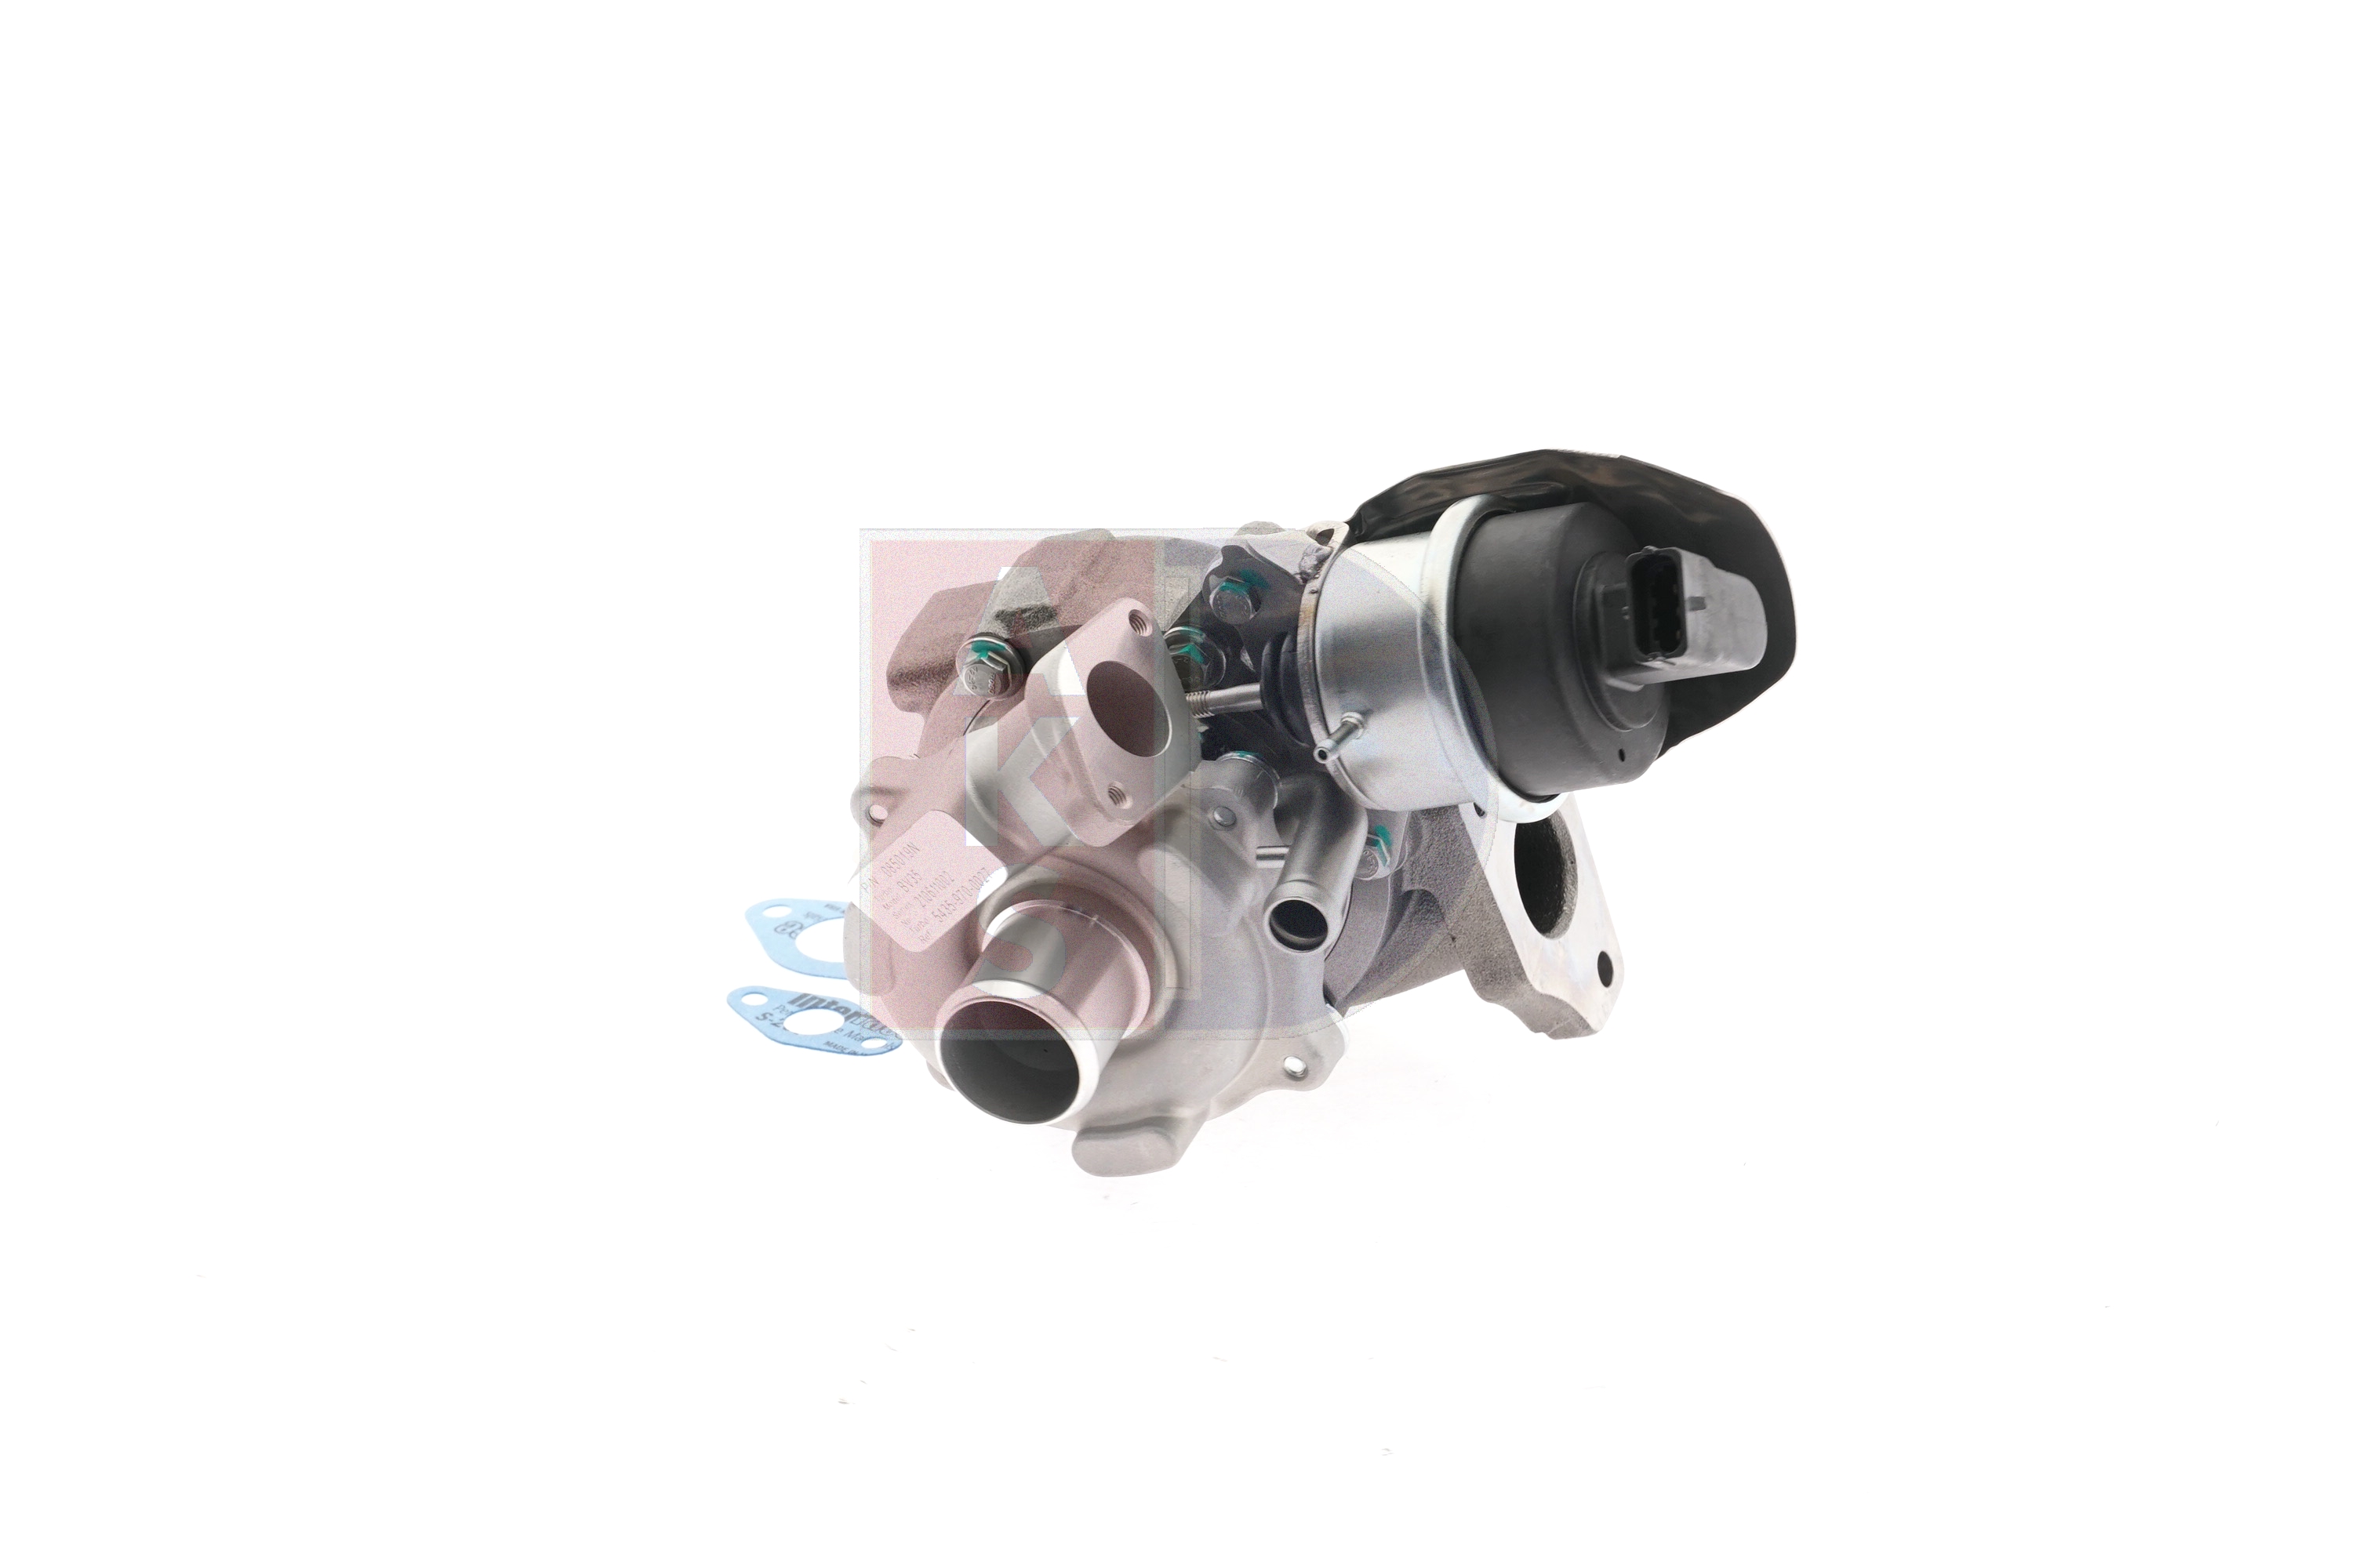 Chevrolet Turbocharger AKS DASIS 085019N at a good price